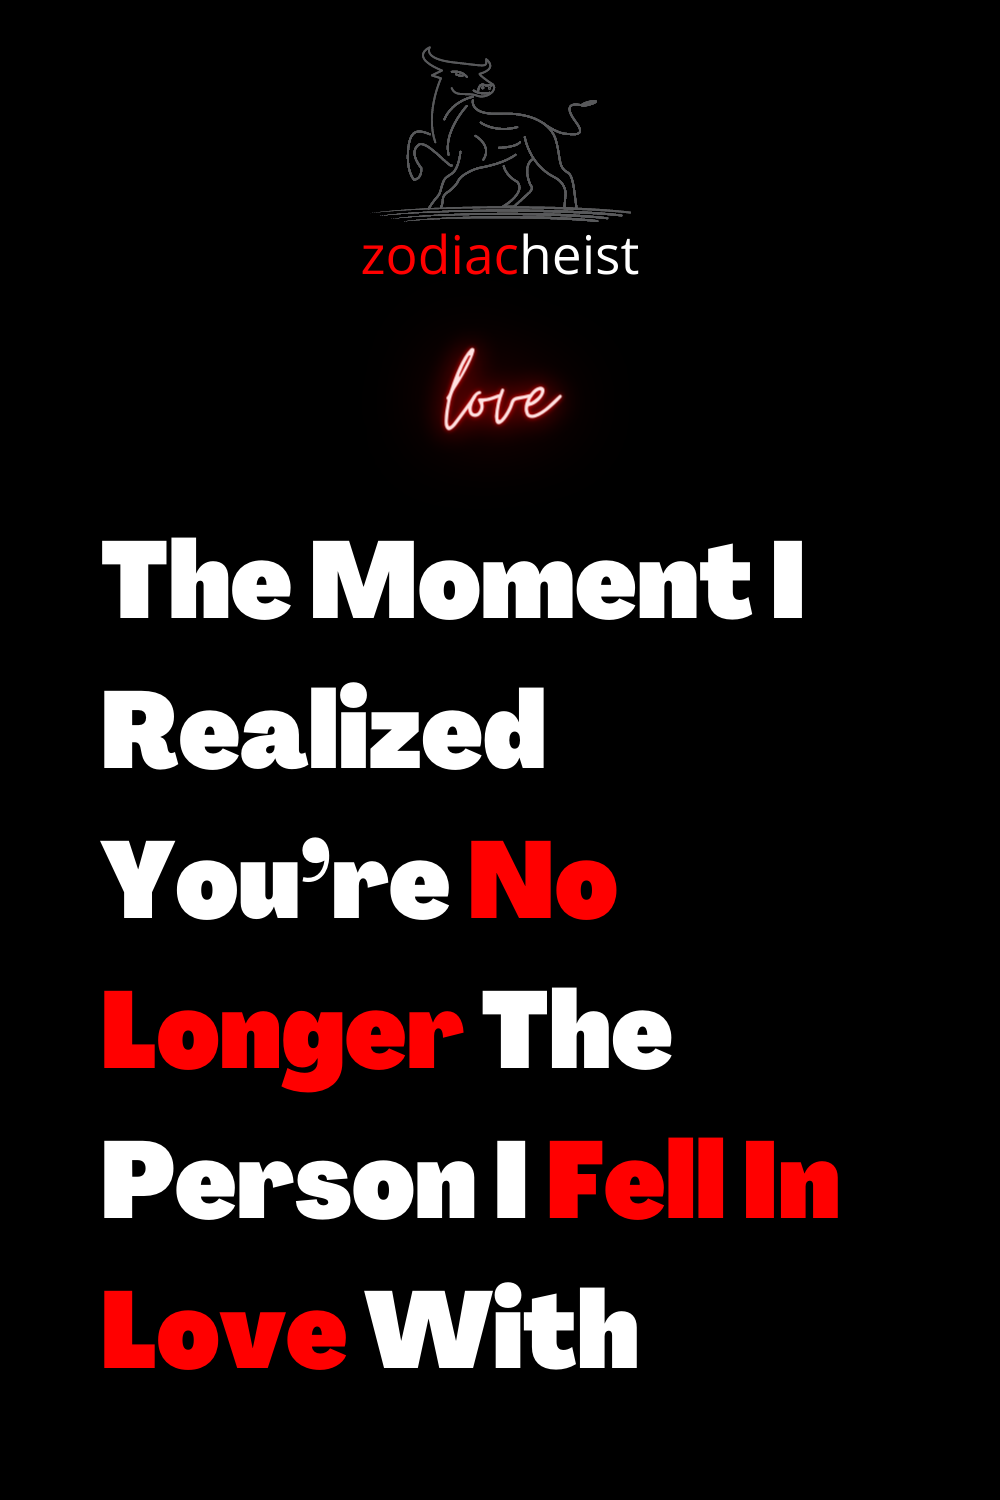 The Moment I Realized You’re No Longer The Person I Fell In Love With